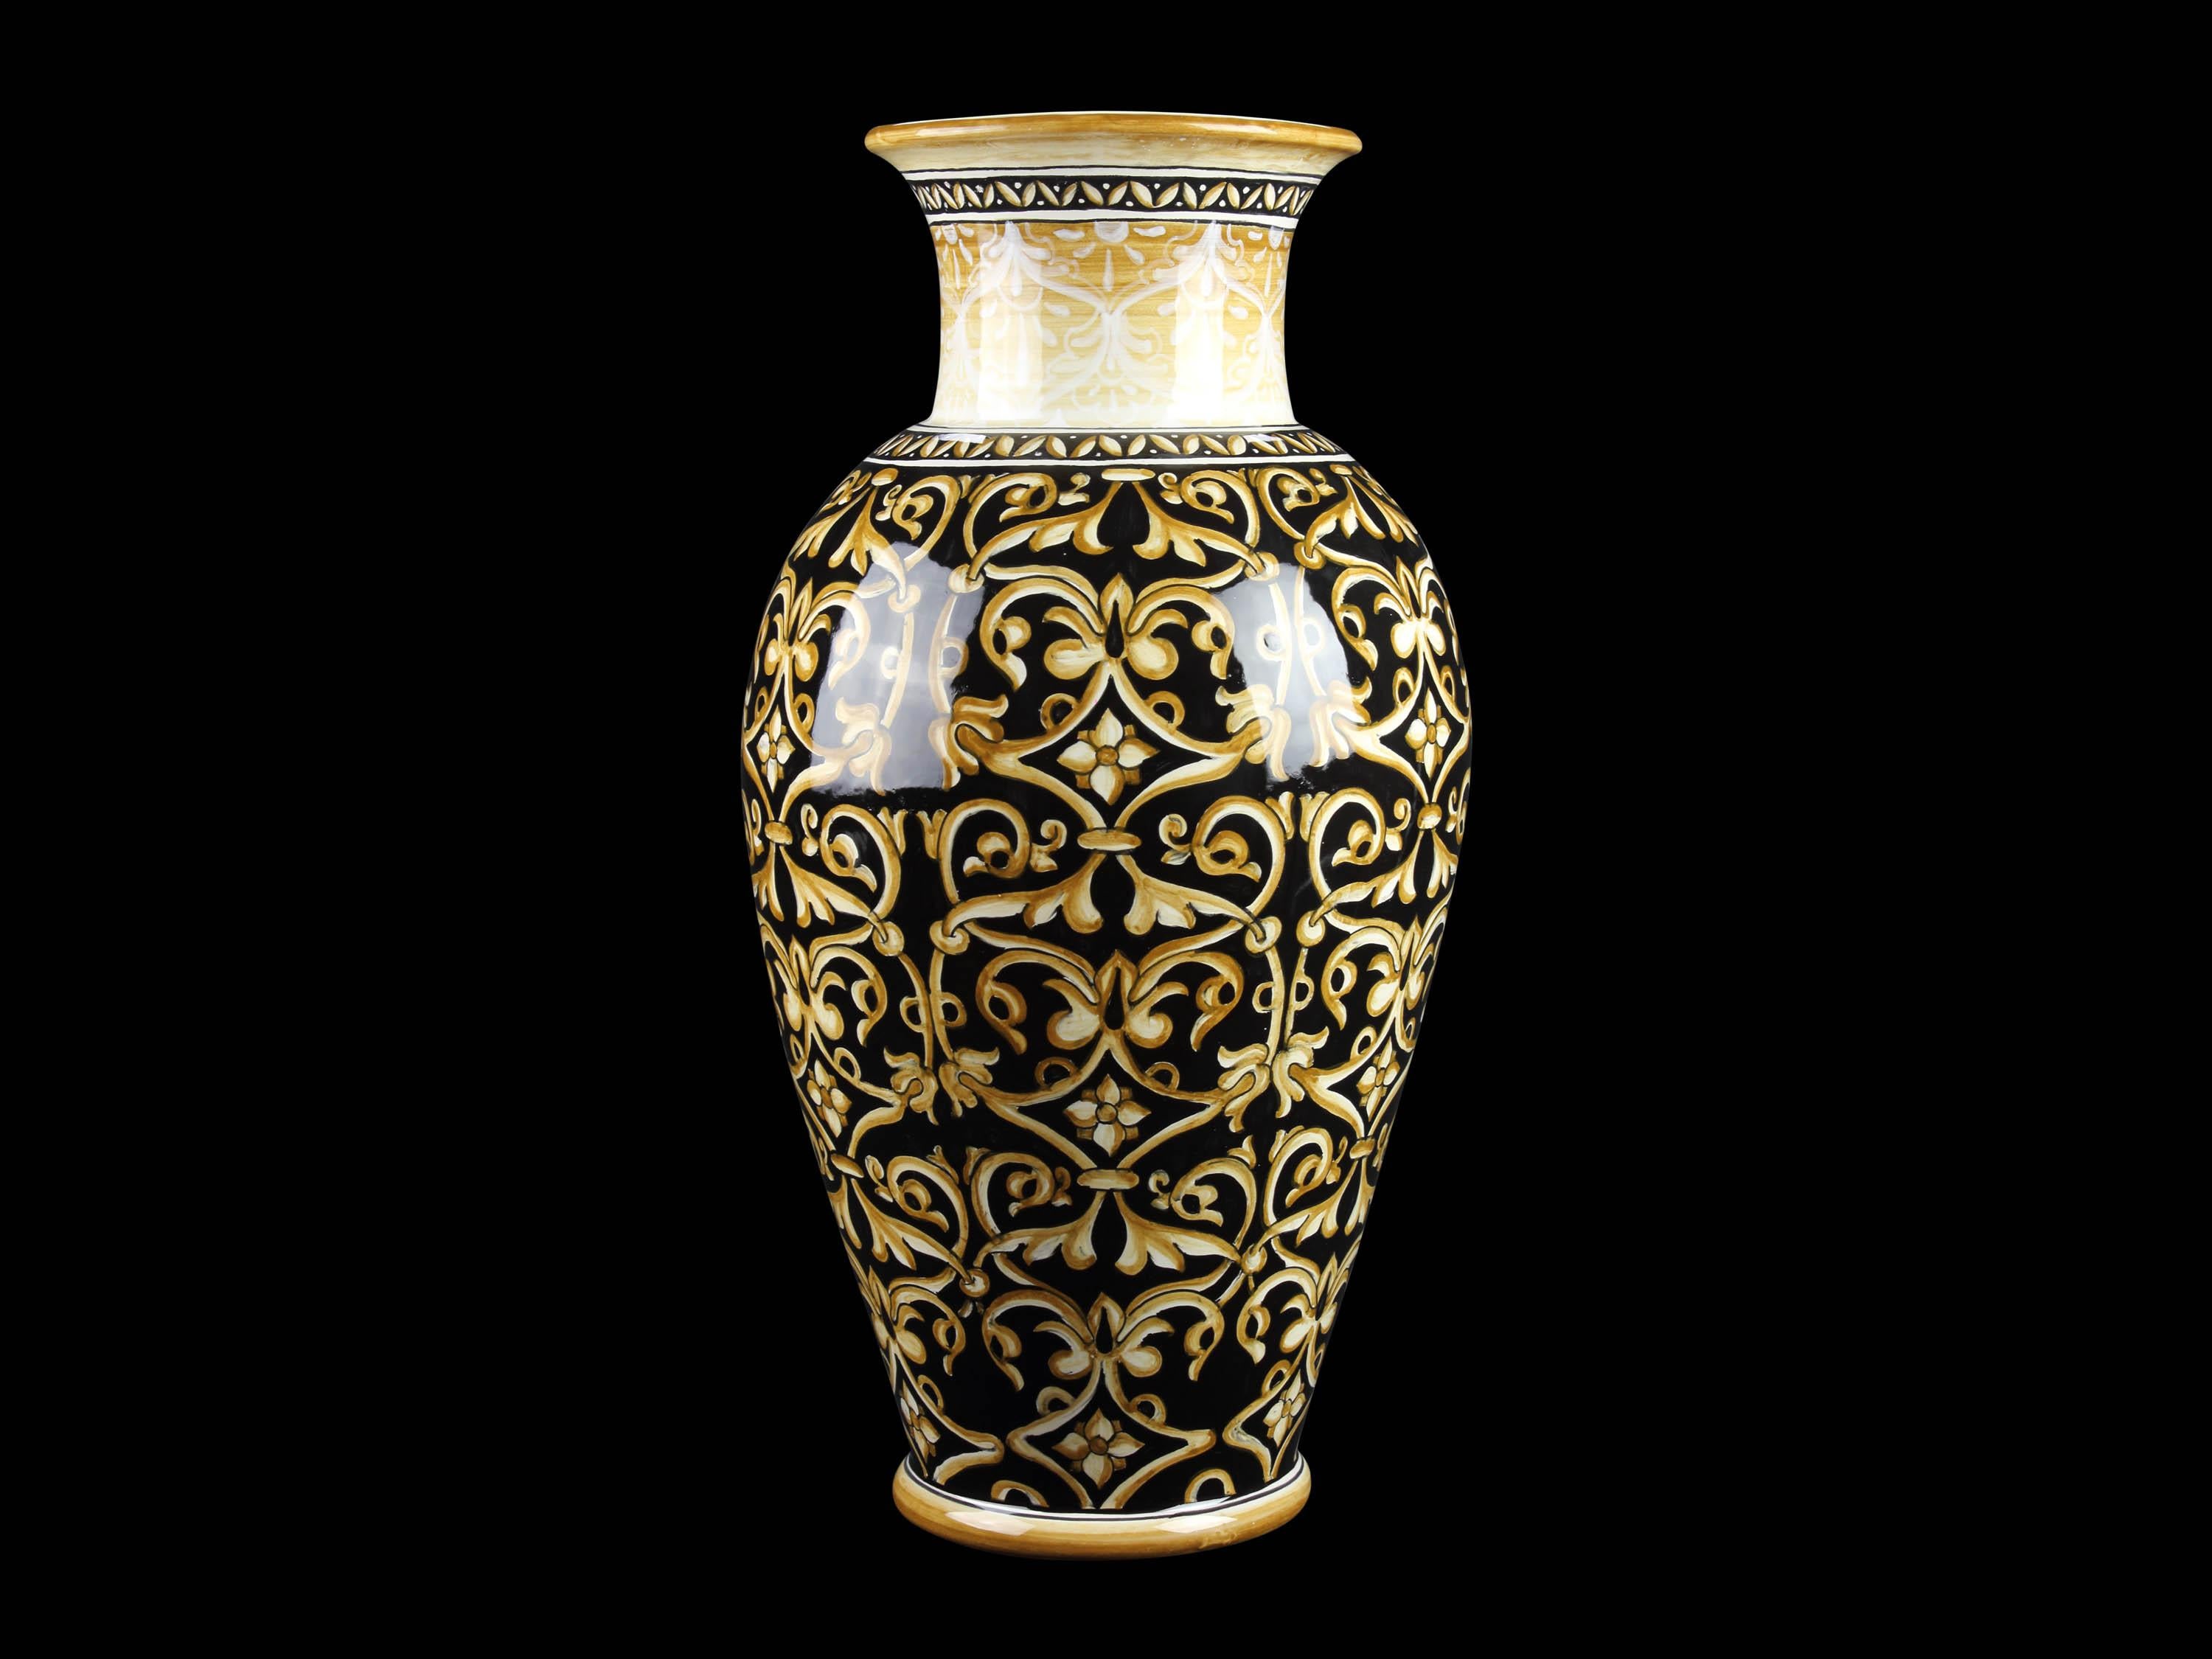 Vase Vessel Majolica Damask Renaissance Black Yellow Hand Painted Italy Deruta In New Condition For Sale In Recanati, IT